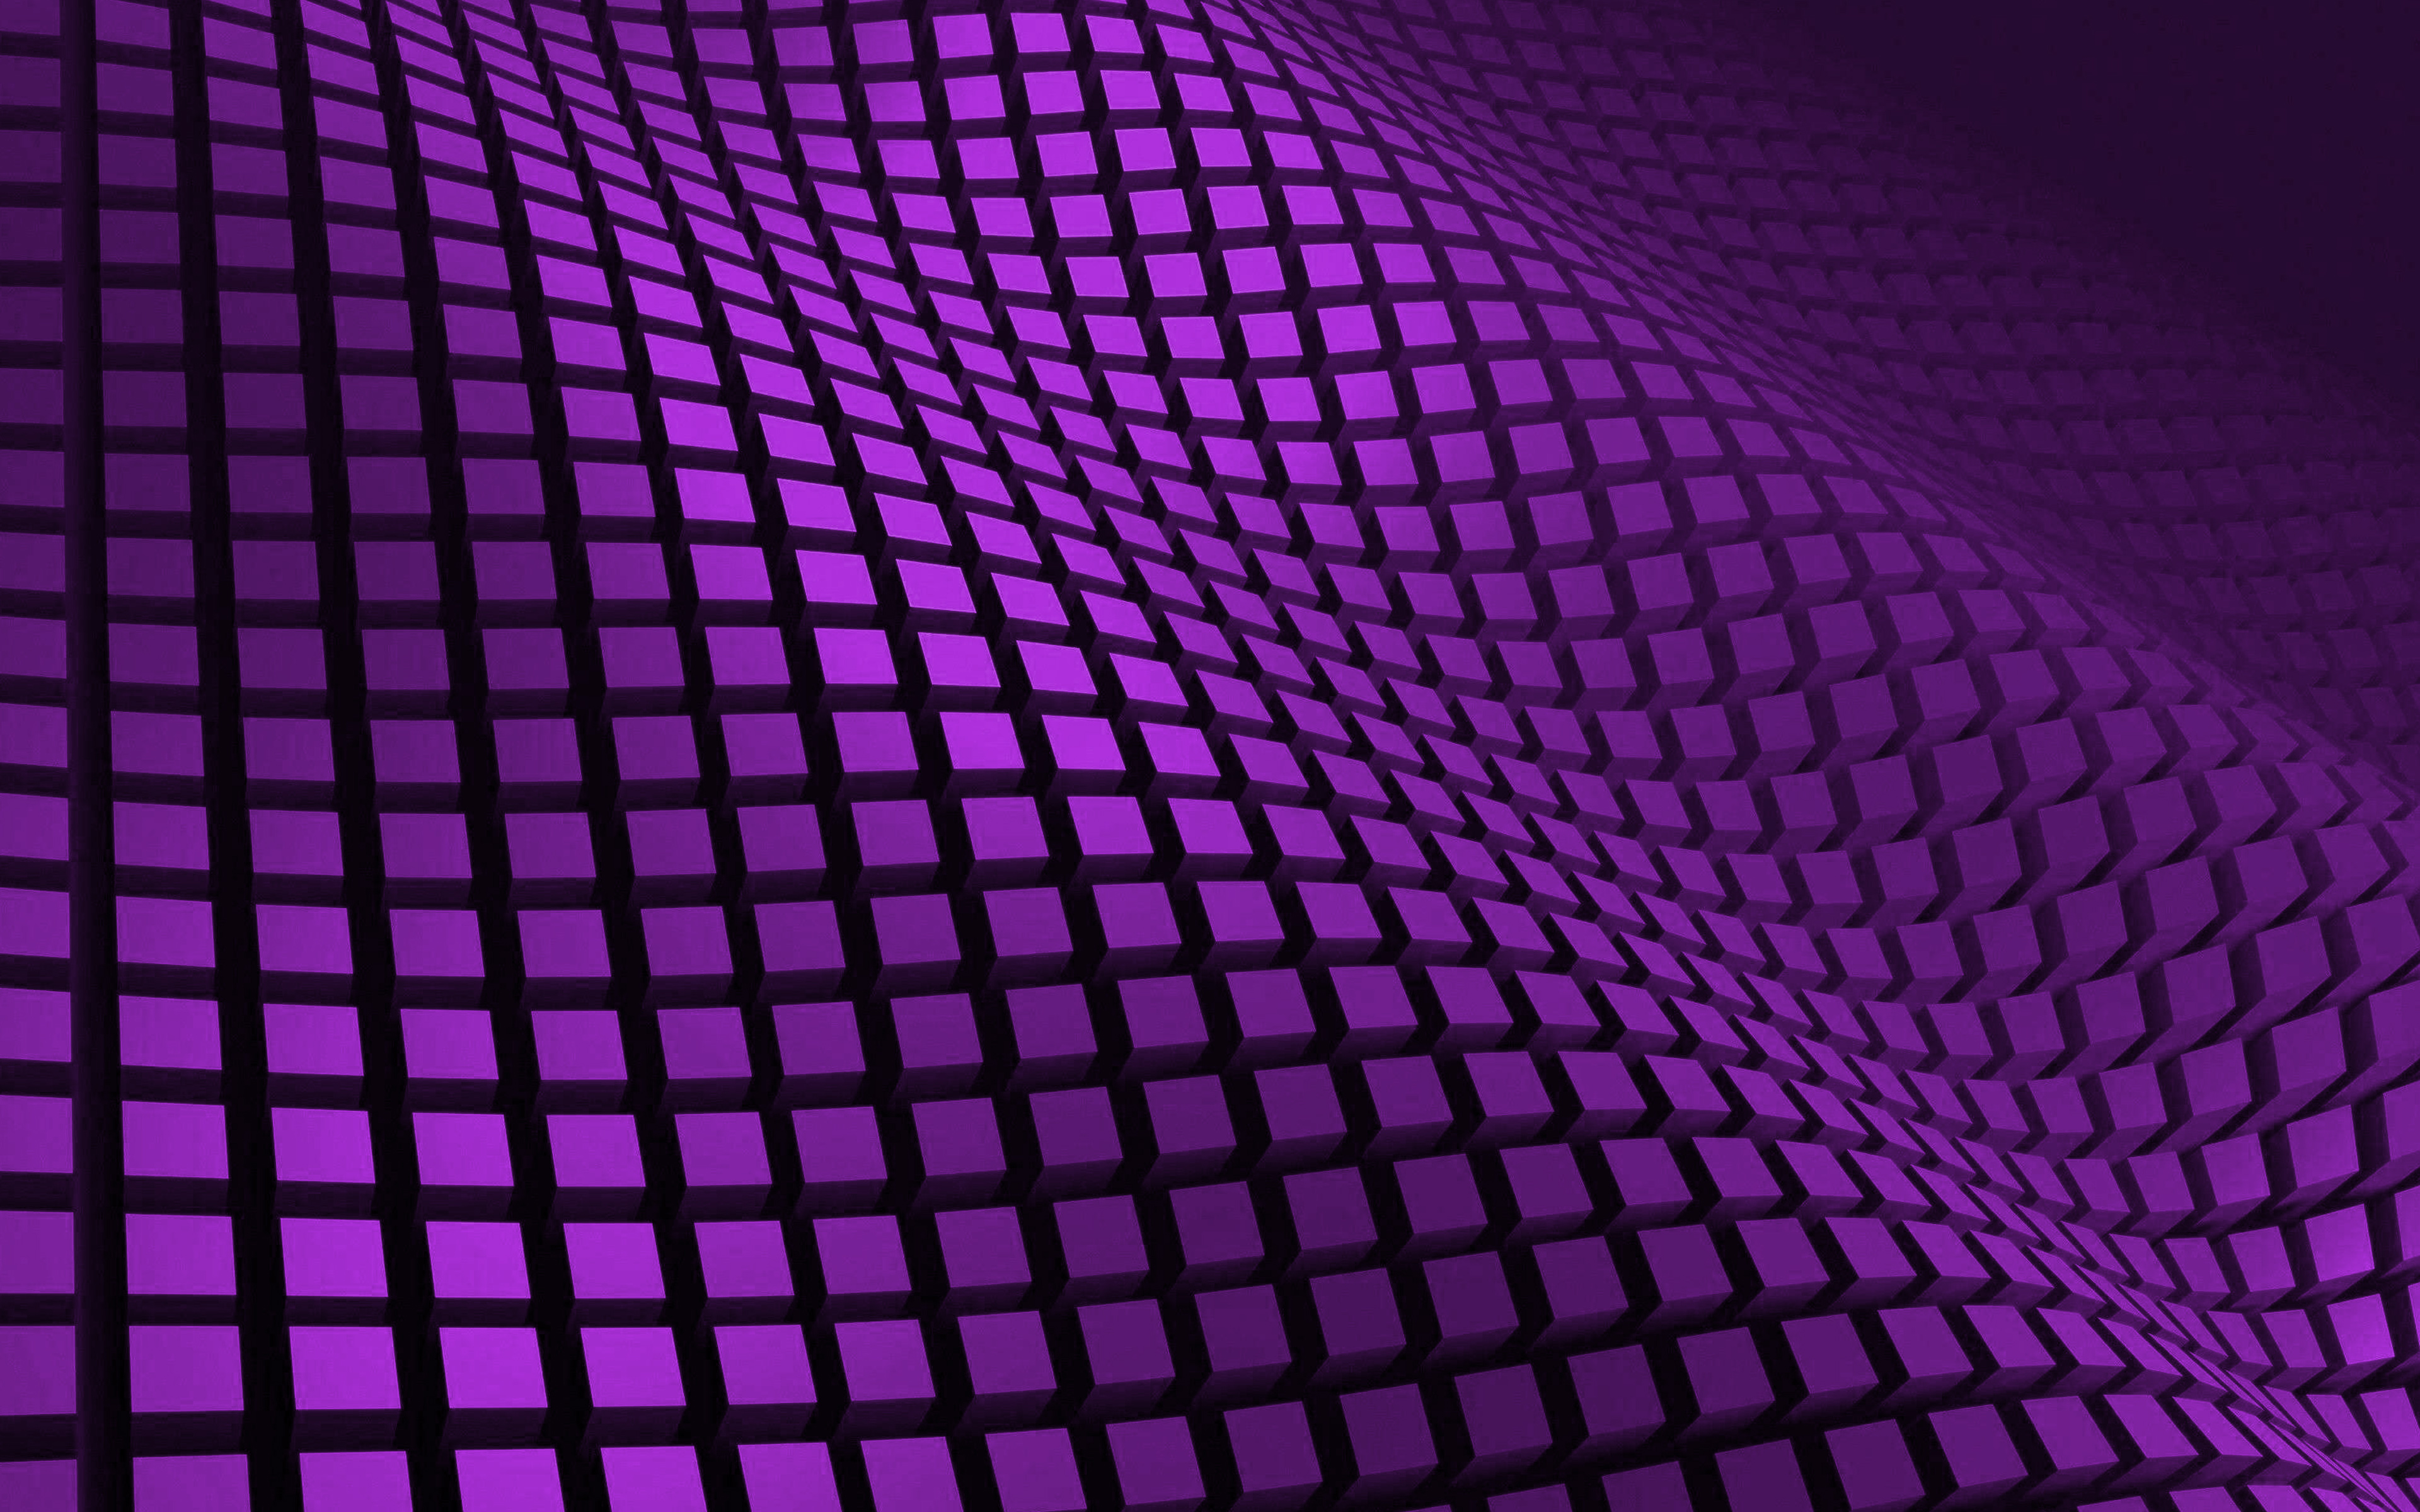 Download wallpaper 3D wave texture, 4k, 3D purple wave, waves background, purple wave background, 3D waves for desktop with resolution 3840x2400. High Quality HD picture wallpaper